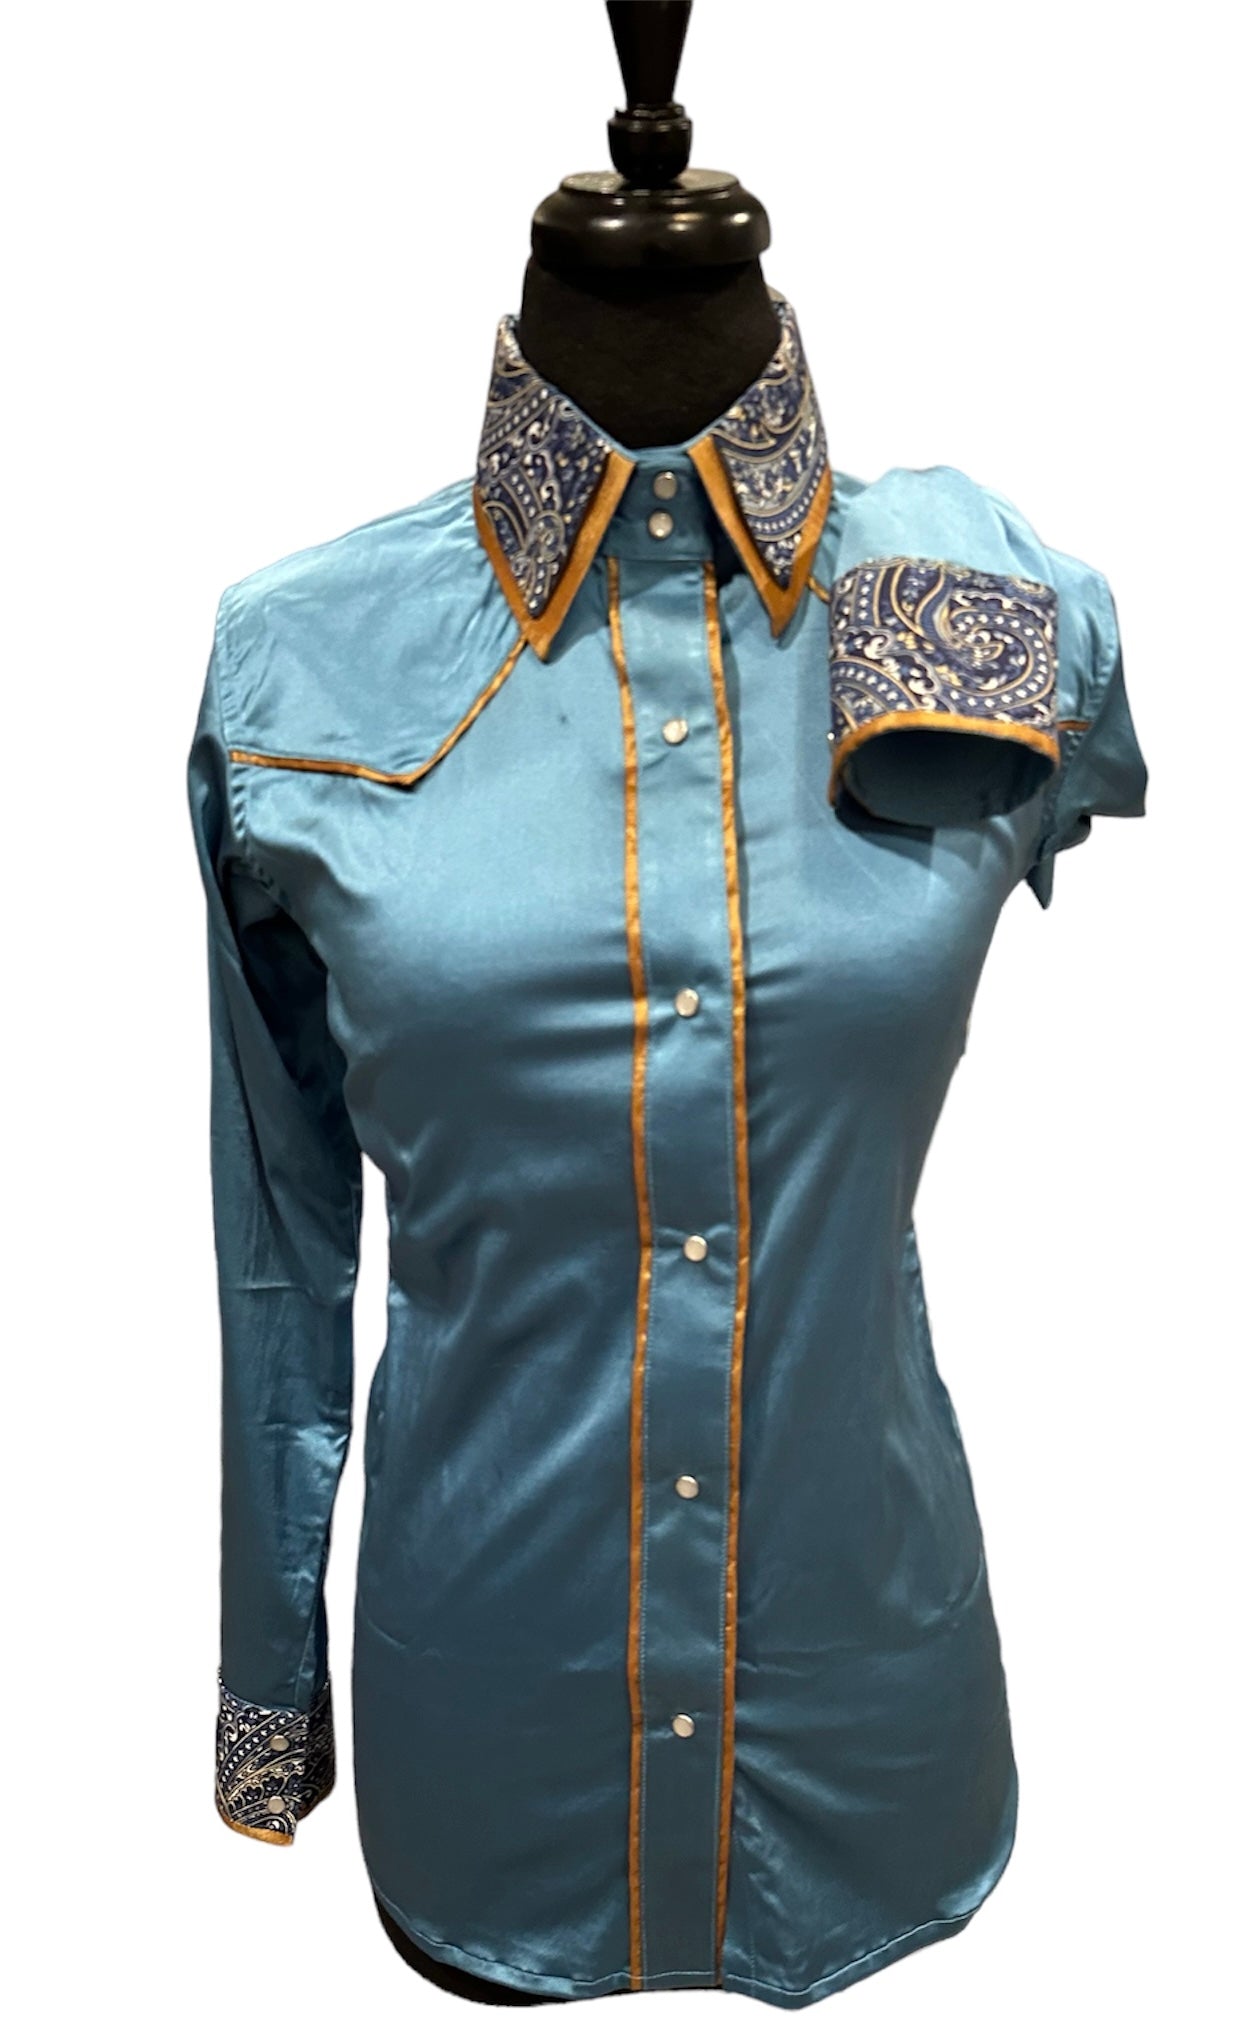 Stretch Satin Western Shirt Light blue with Navy and Gold Accents